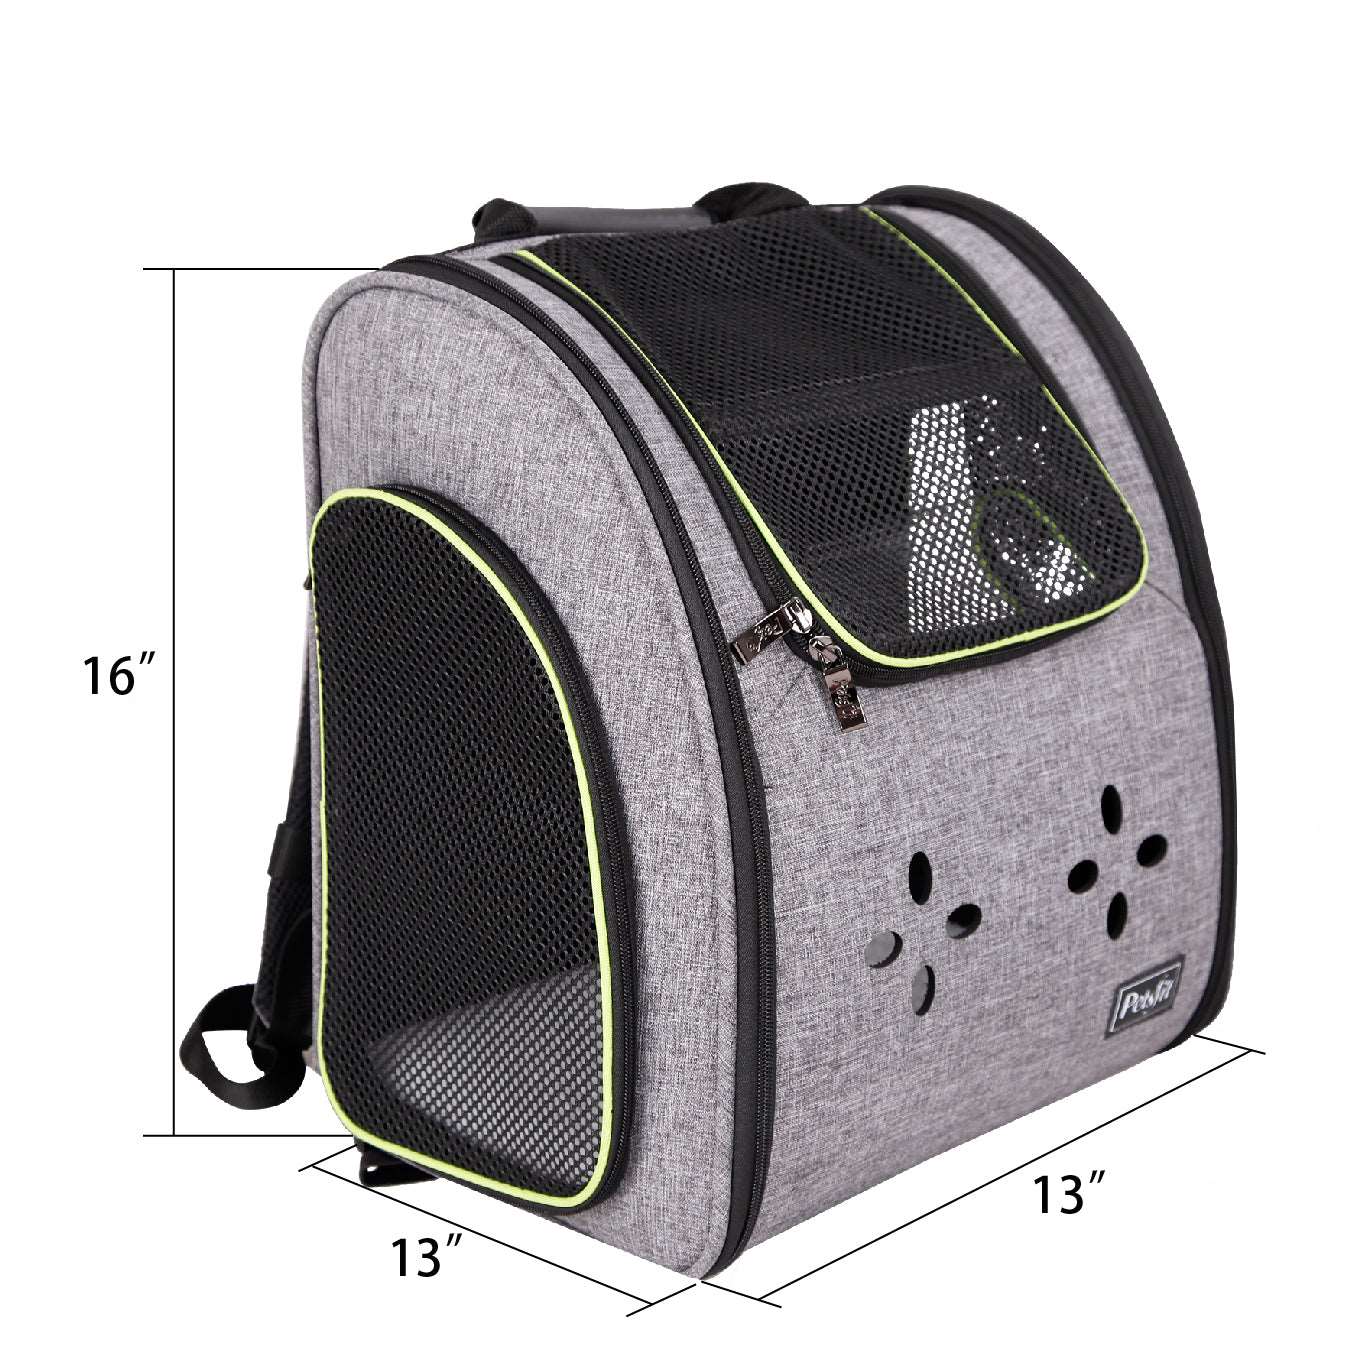 Petsfit-Cat-and-Dog-Backpack-Carrier-Soft-Side-with-Good-Ventilation-09